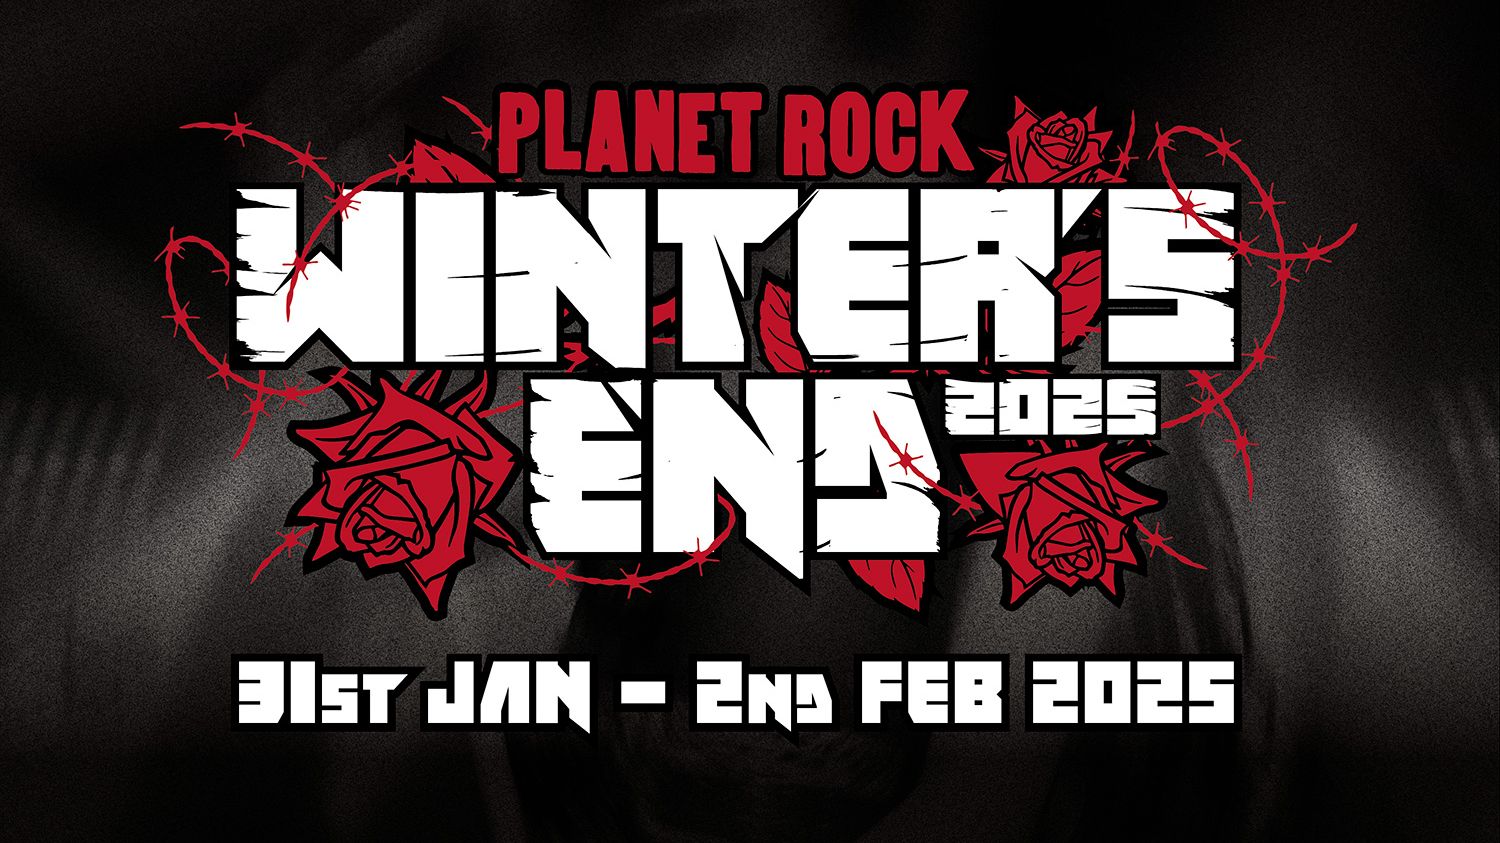 Winter's End 2025 Early Bird tickets on sale at 2024 prices with free T